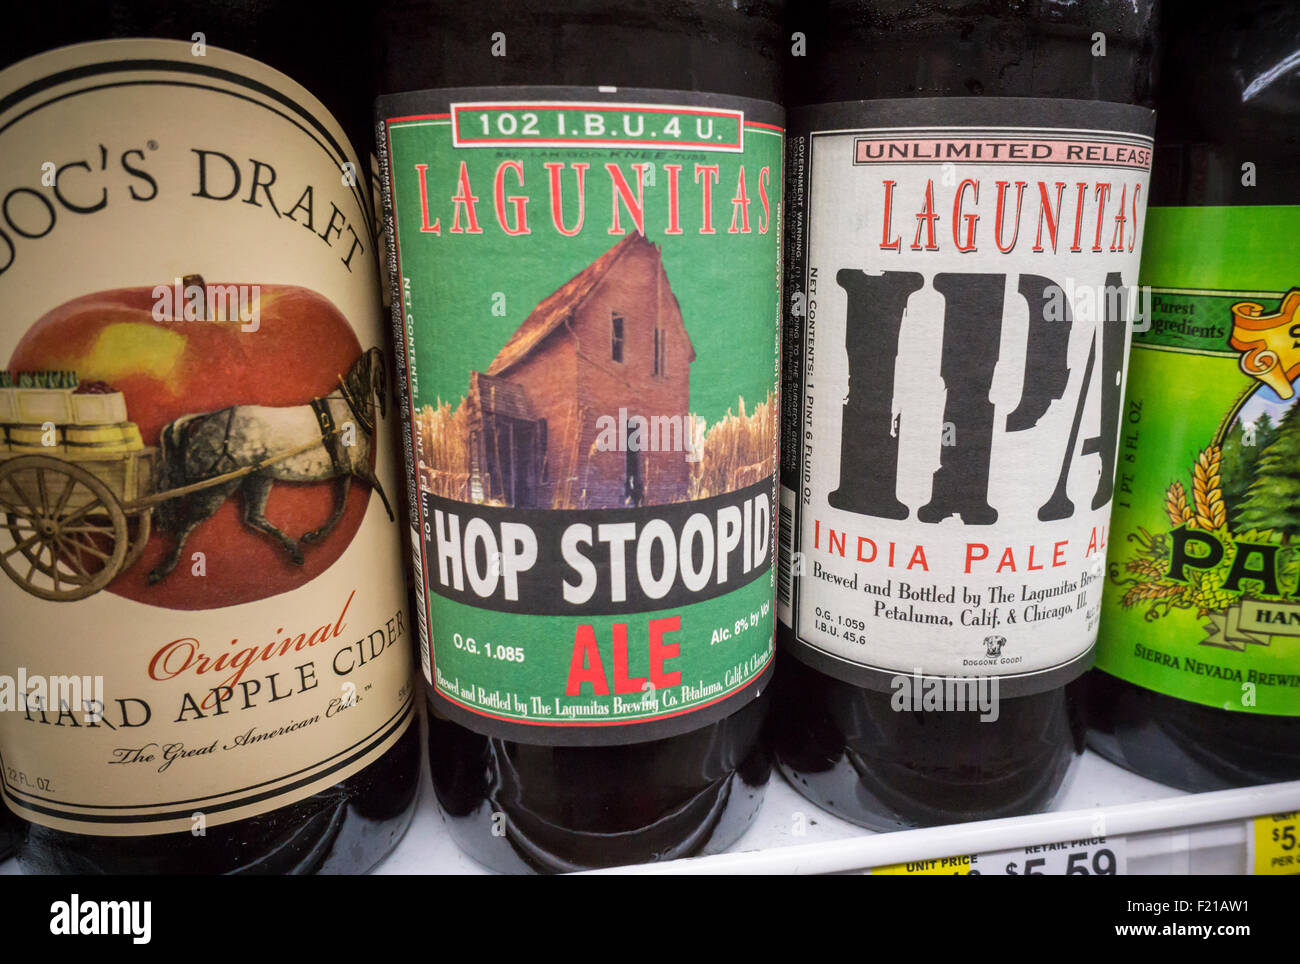 Bottles of Lagunitas beer in a supermarket cooler on Tuesday, September 8, 2015. Amsterdam based Heineken brewers has bought a fifty percent stake in California based Lagunitas Brewing Company in an undisclosed cash deal.  Heinken is the largest brewer in Europe, also producing Amstel, Tecate and Dos Equis. Lagunitas will continue to operate separately. (© Richard B. Levine) Stock Photo